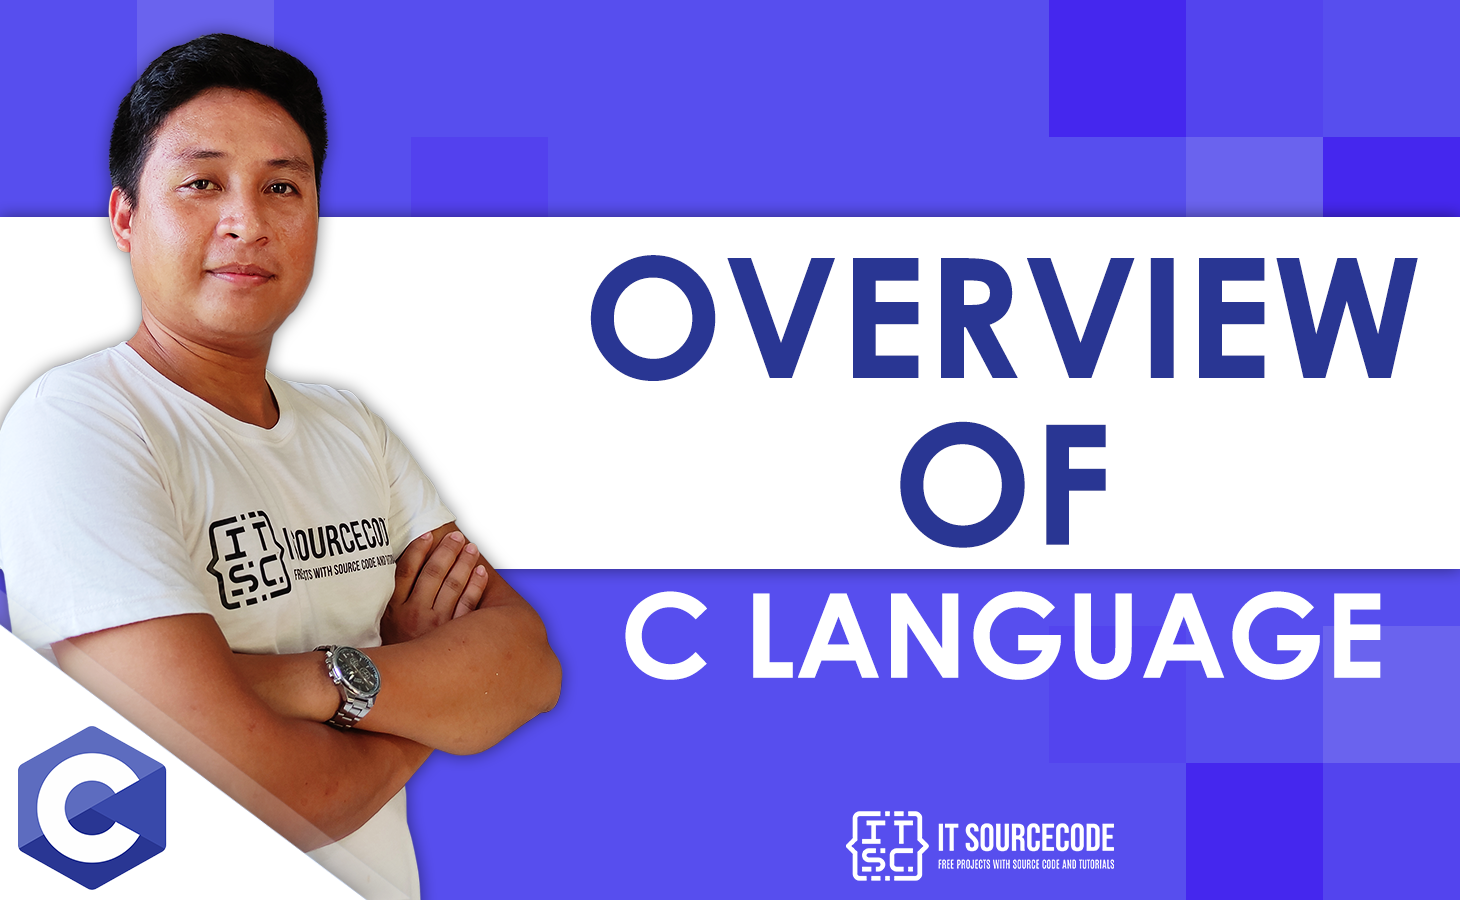 Overview of C Language